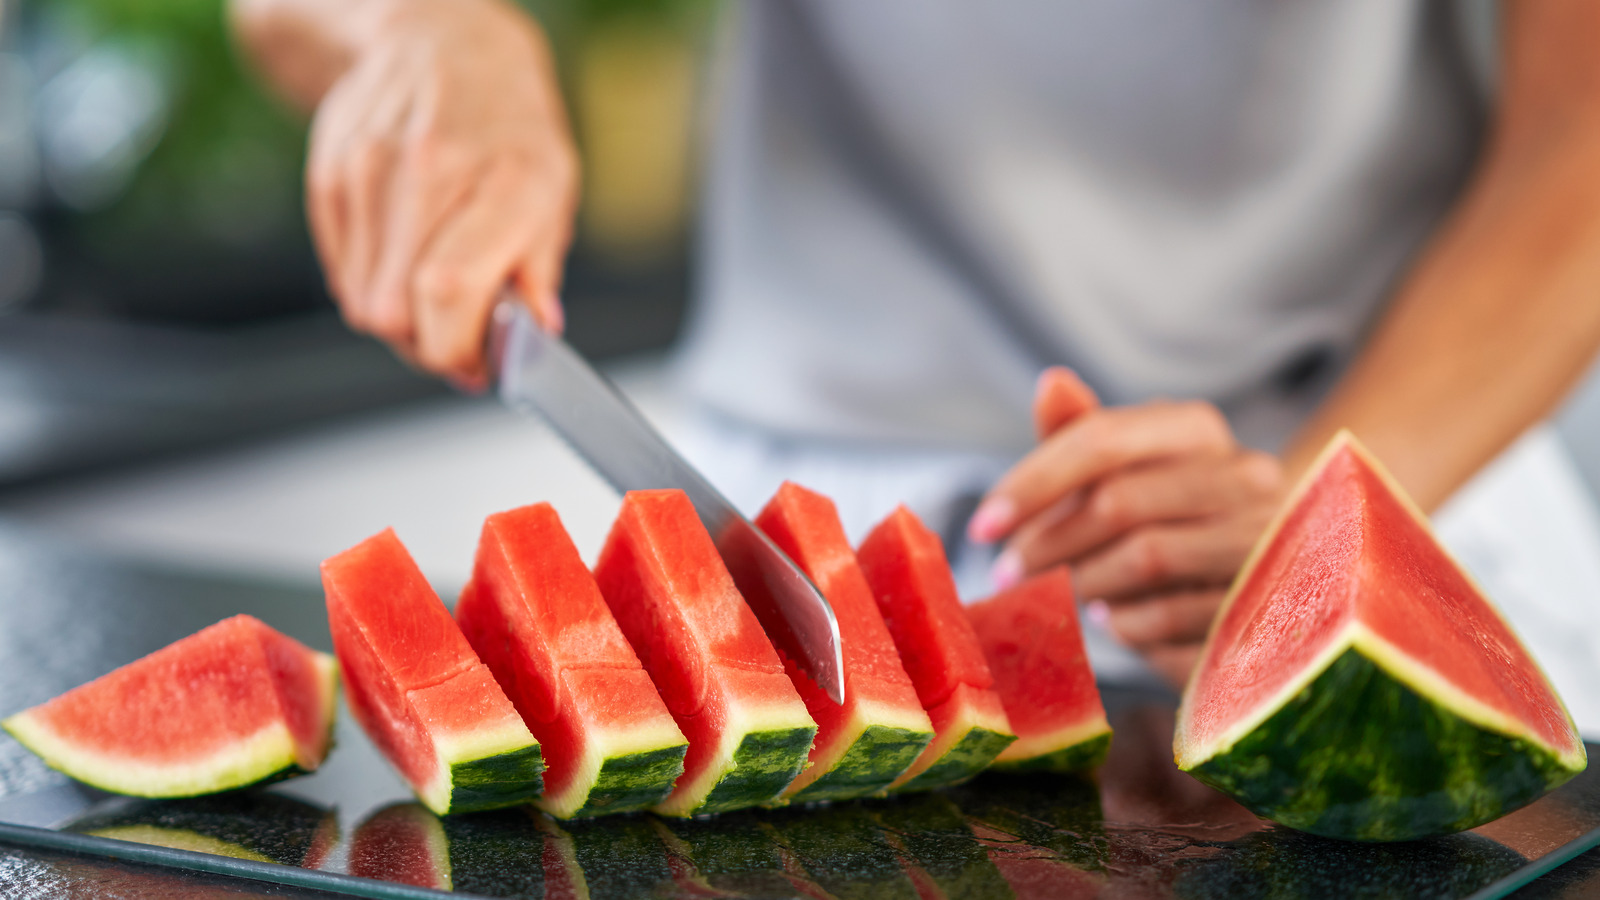 Best Knives for Cutting Fruit